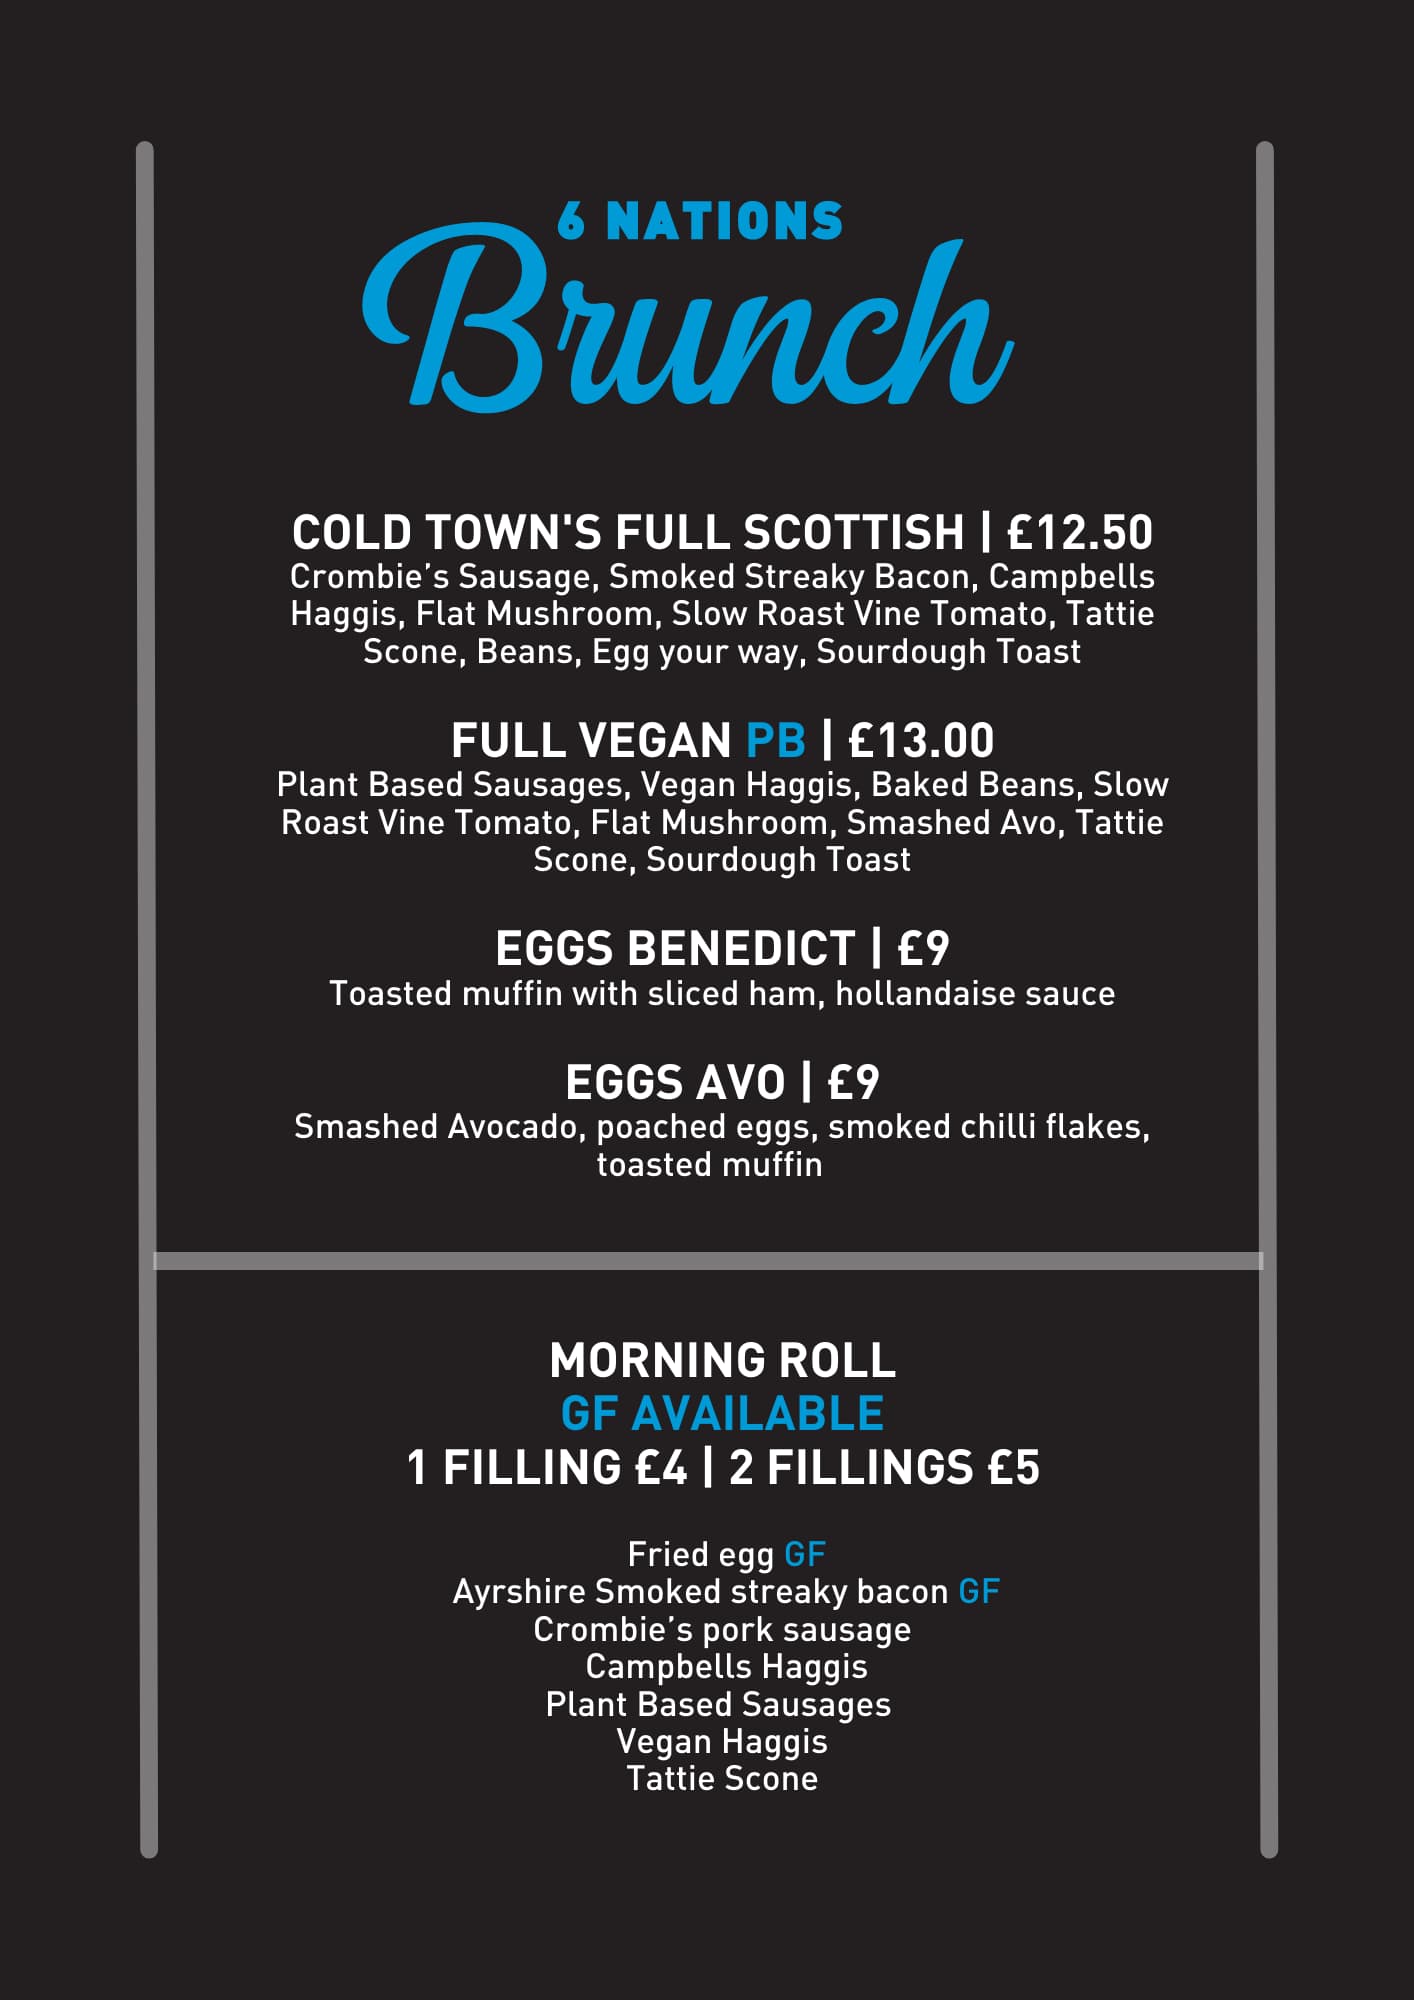 Brunch in Edinburgh for the Six Nations